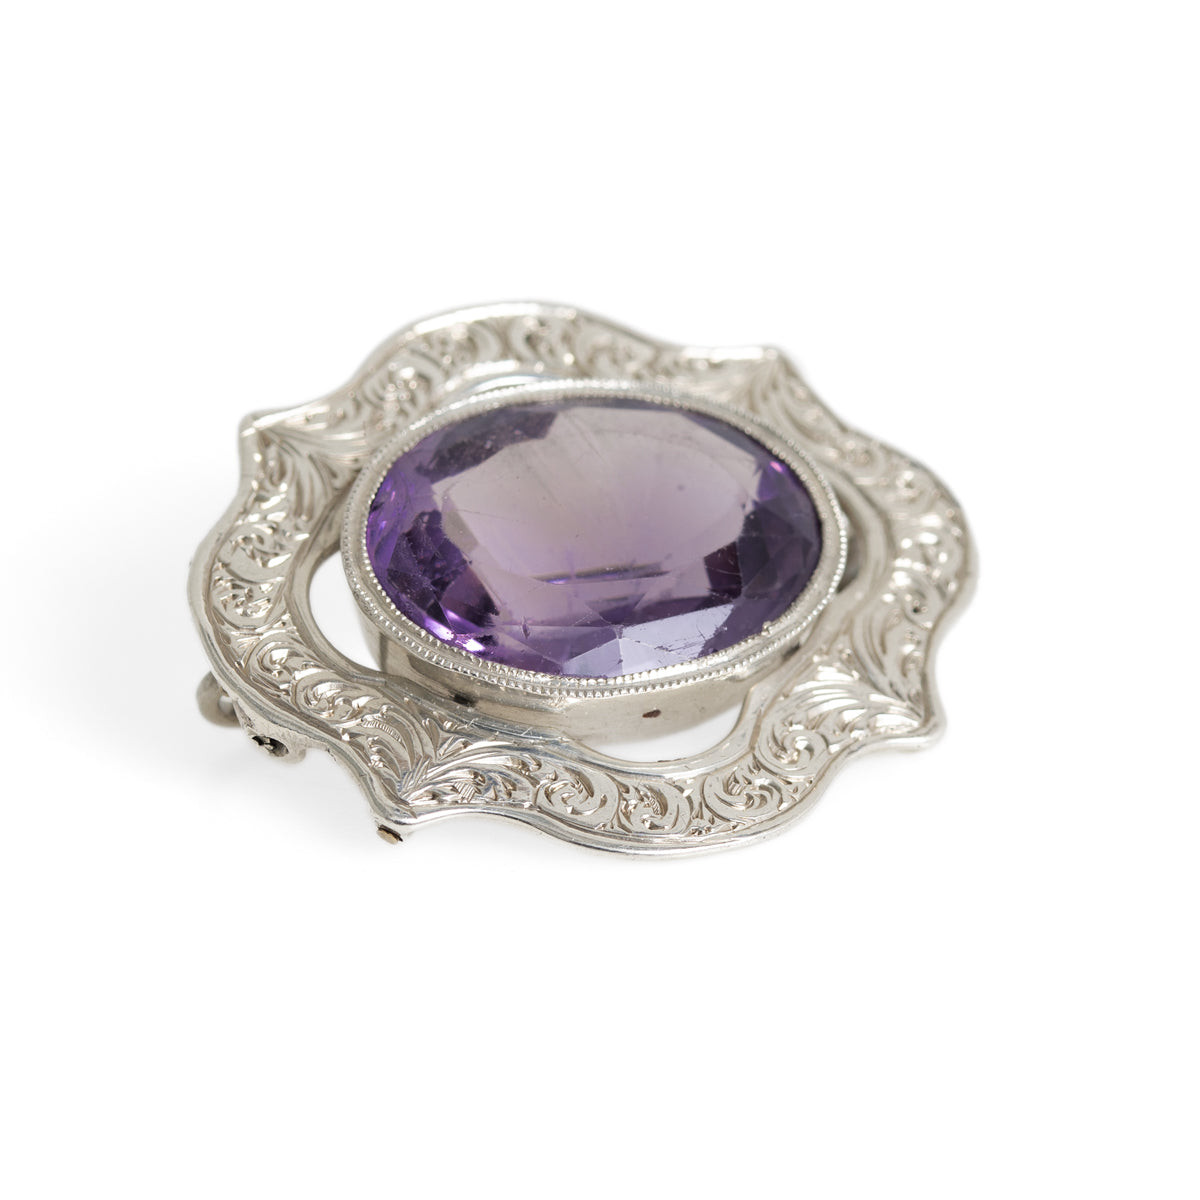 Antique Victorian Chased Silver & Large Natural Amethyst Brooch / Pin c.1860 (A1193)